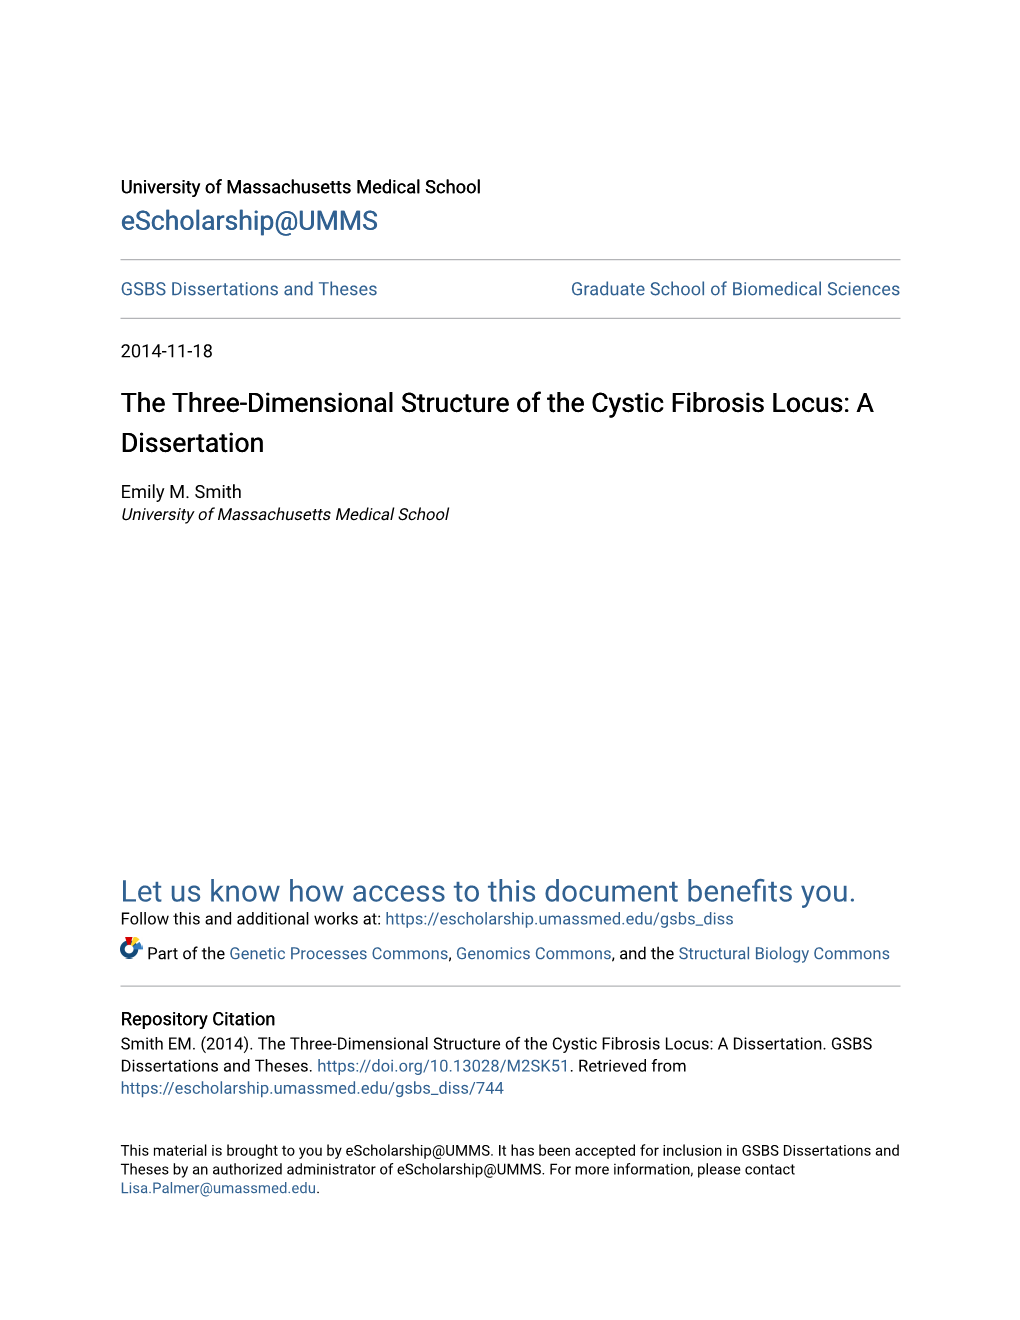 The Three-Dimensional Structure of the Cystic Fibrosis Locus: a Dissertation